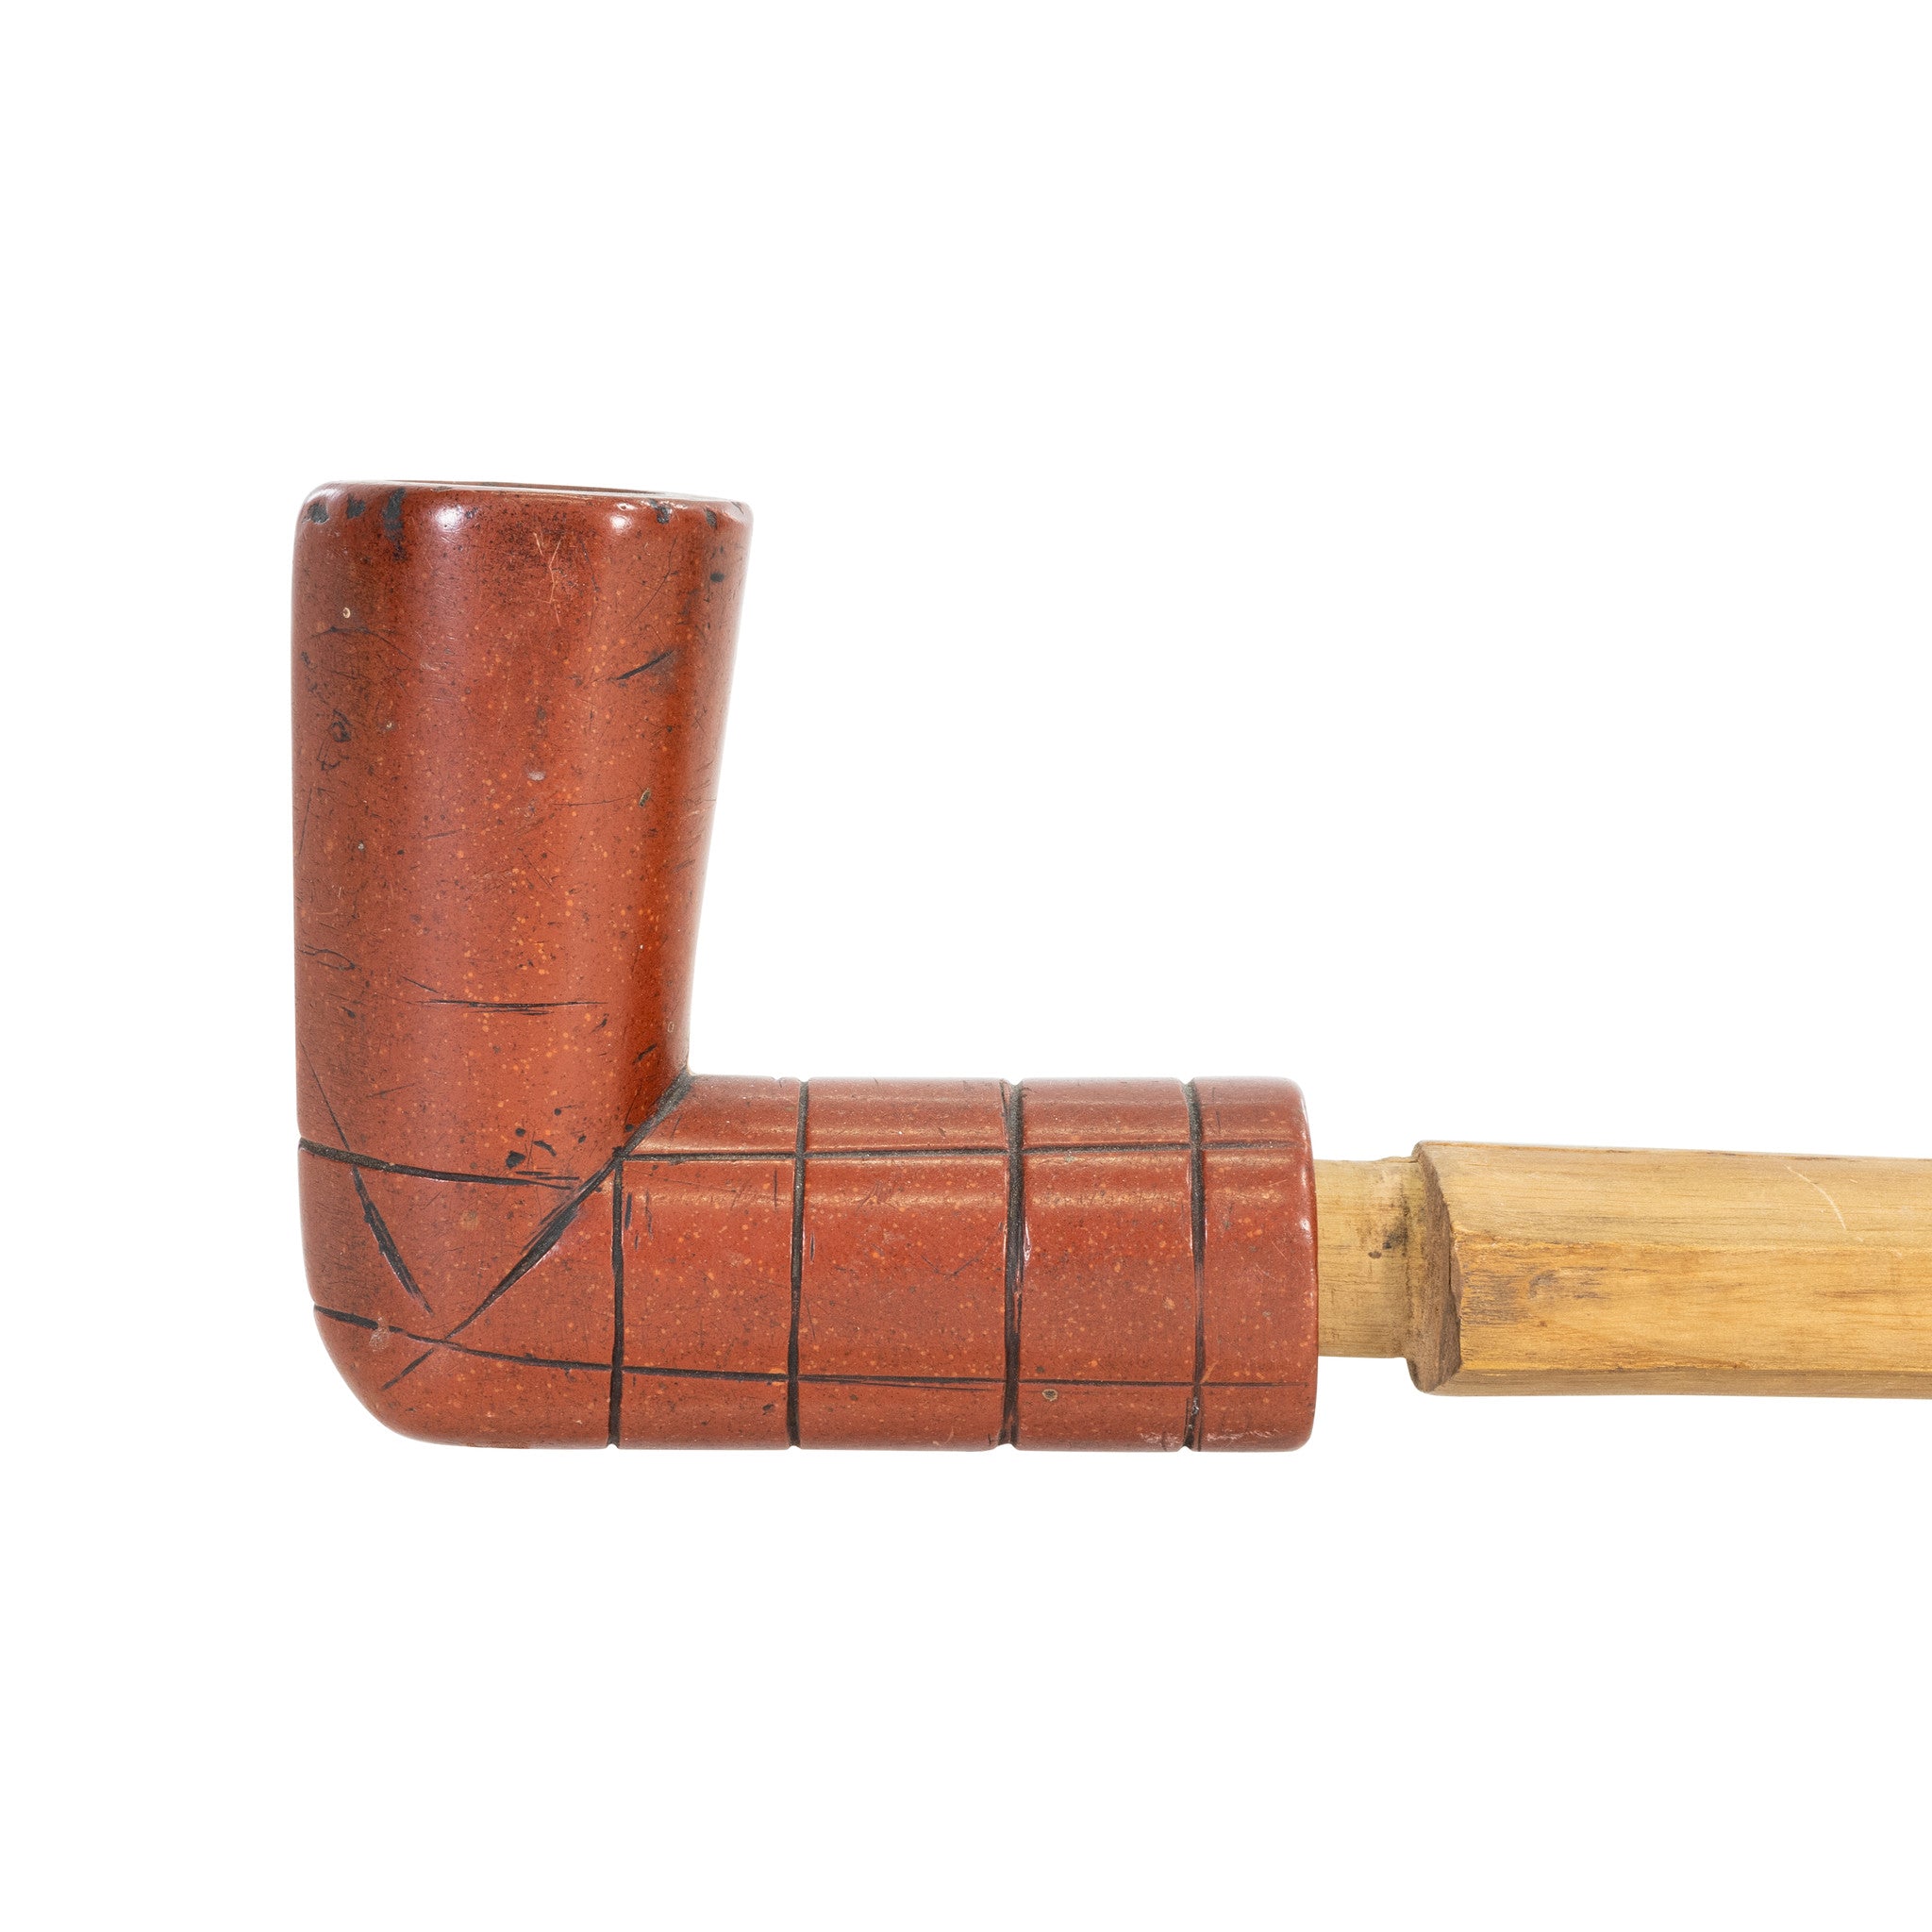 Quilled Sioux Elbow Pipe